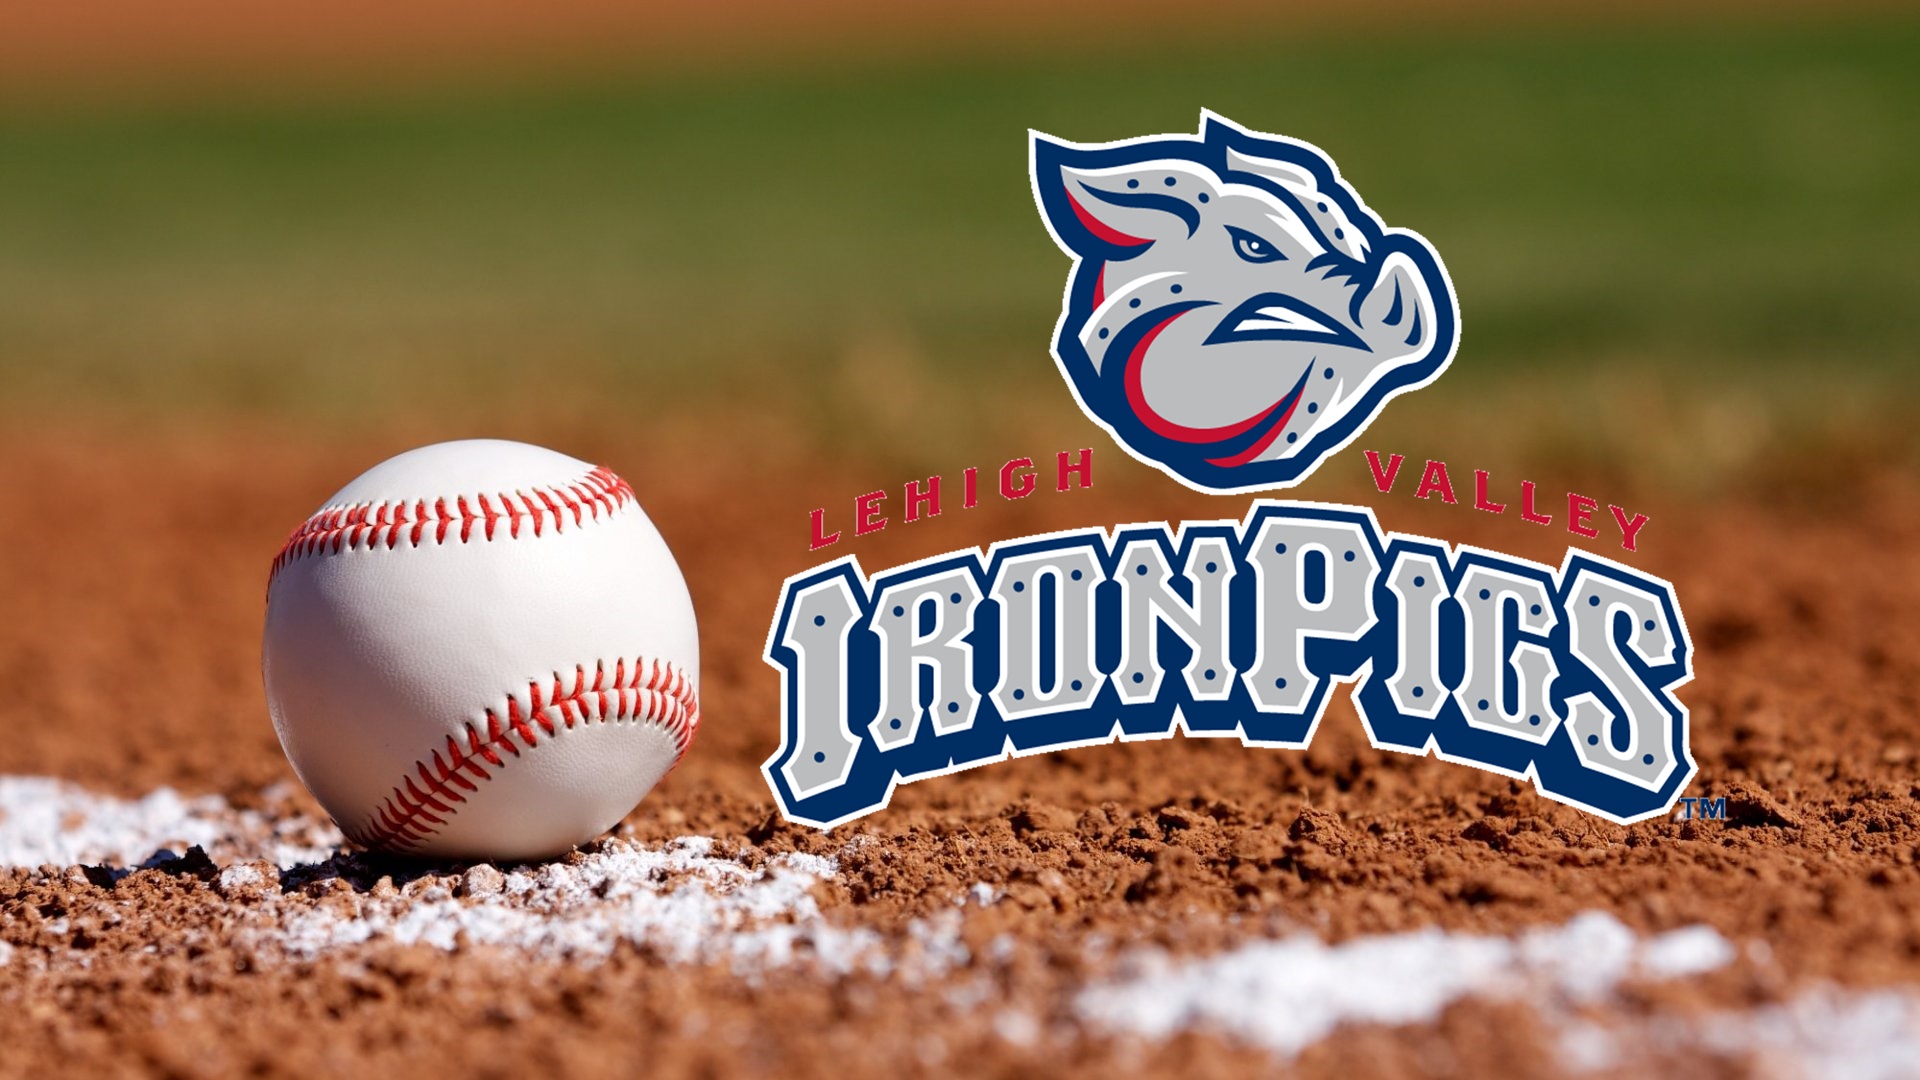 Scott Kingery helps the IronPigs get its first win of the season